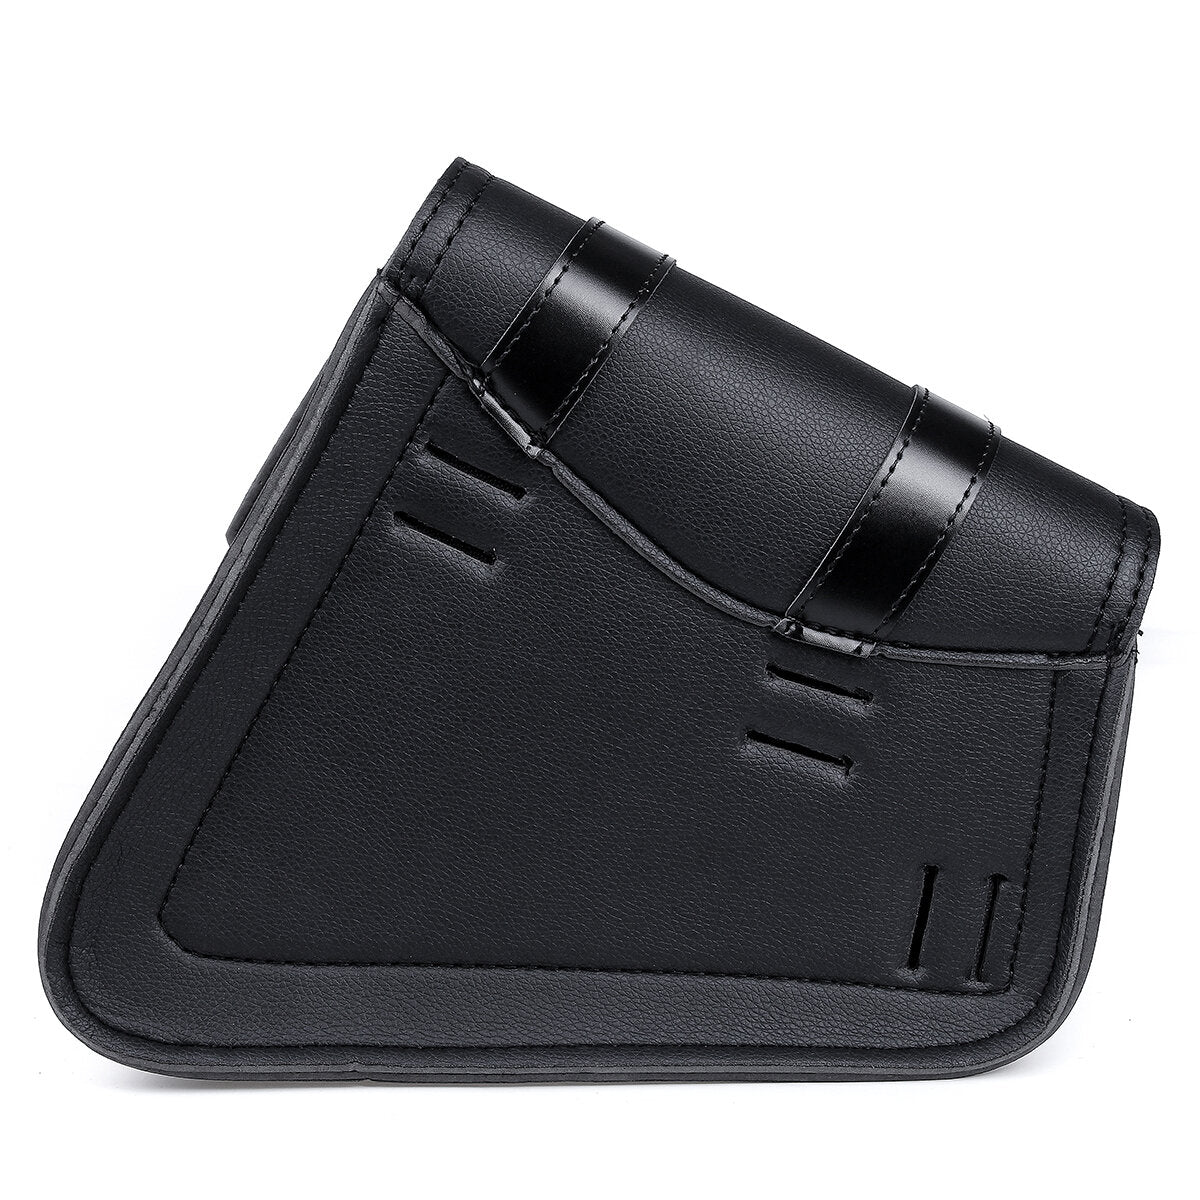 Motorcycle Saddlebags Release Buckle Black PU Leather Universal Organizer